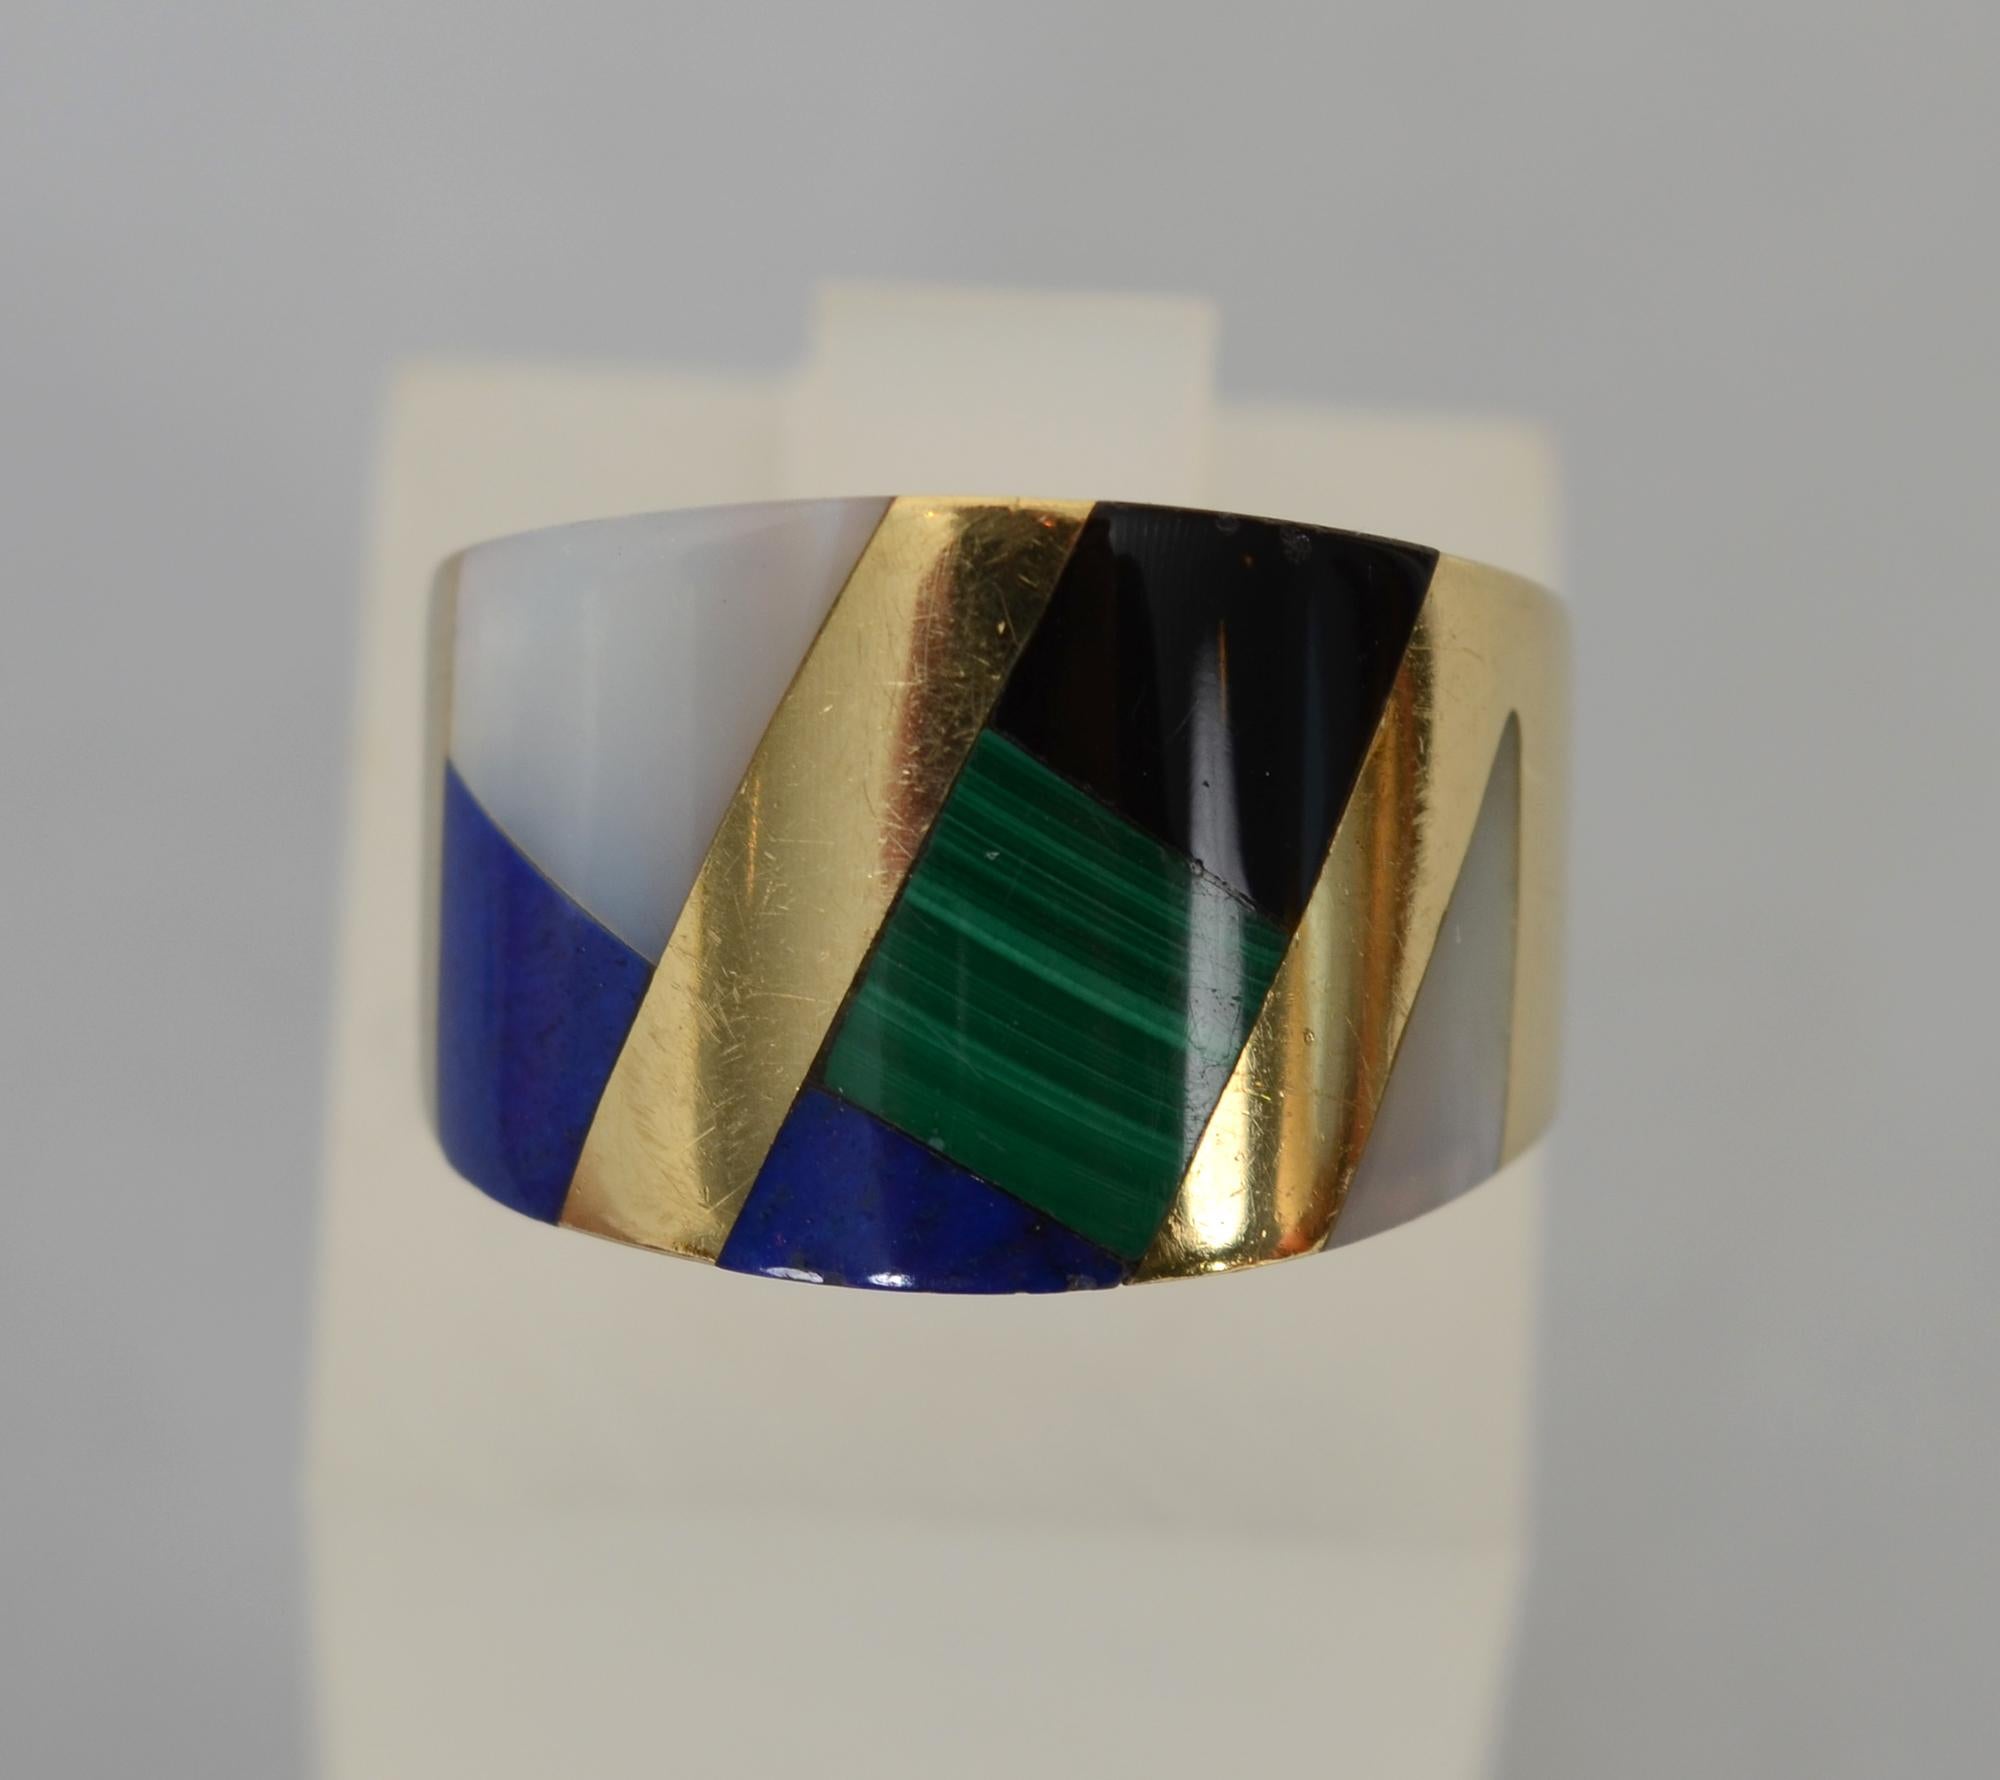 Beautiful wide band gold ring with the finely inlaid multistones for which Asch Grossbardt is known. The onyx; malachite; lapis lazuli and mother of pearl are separated by diagonal bands of 14 karat gold. The ring is 9/16